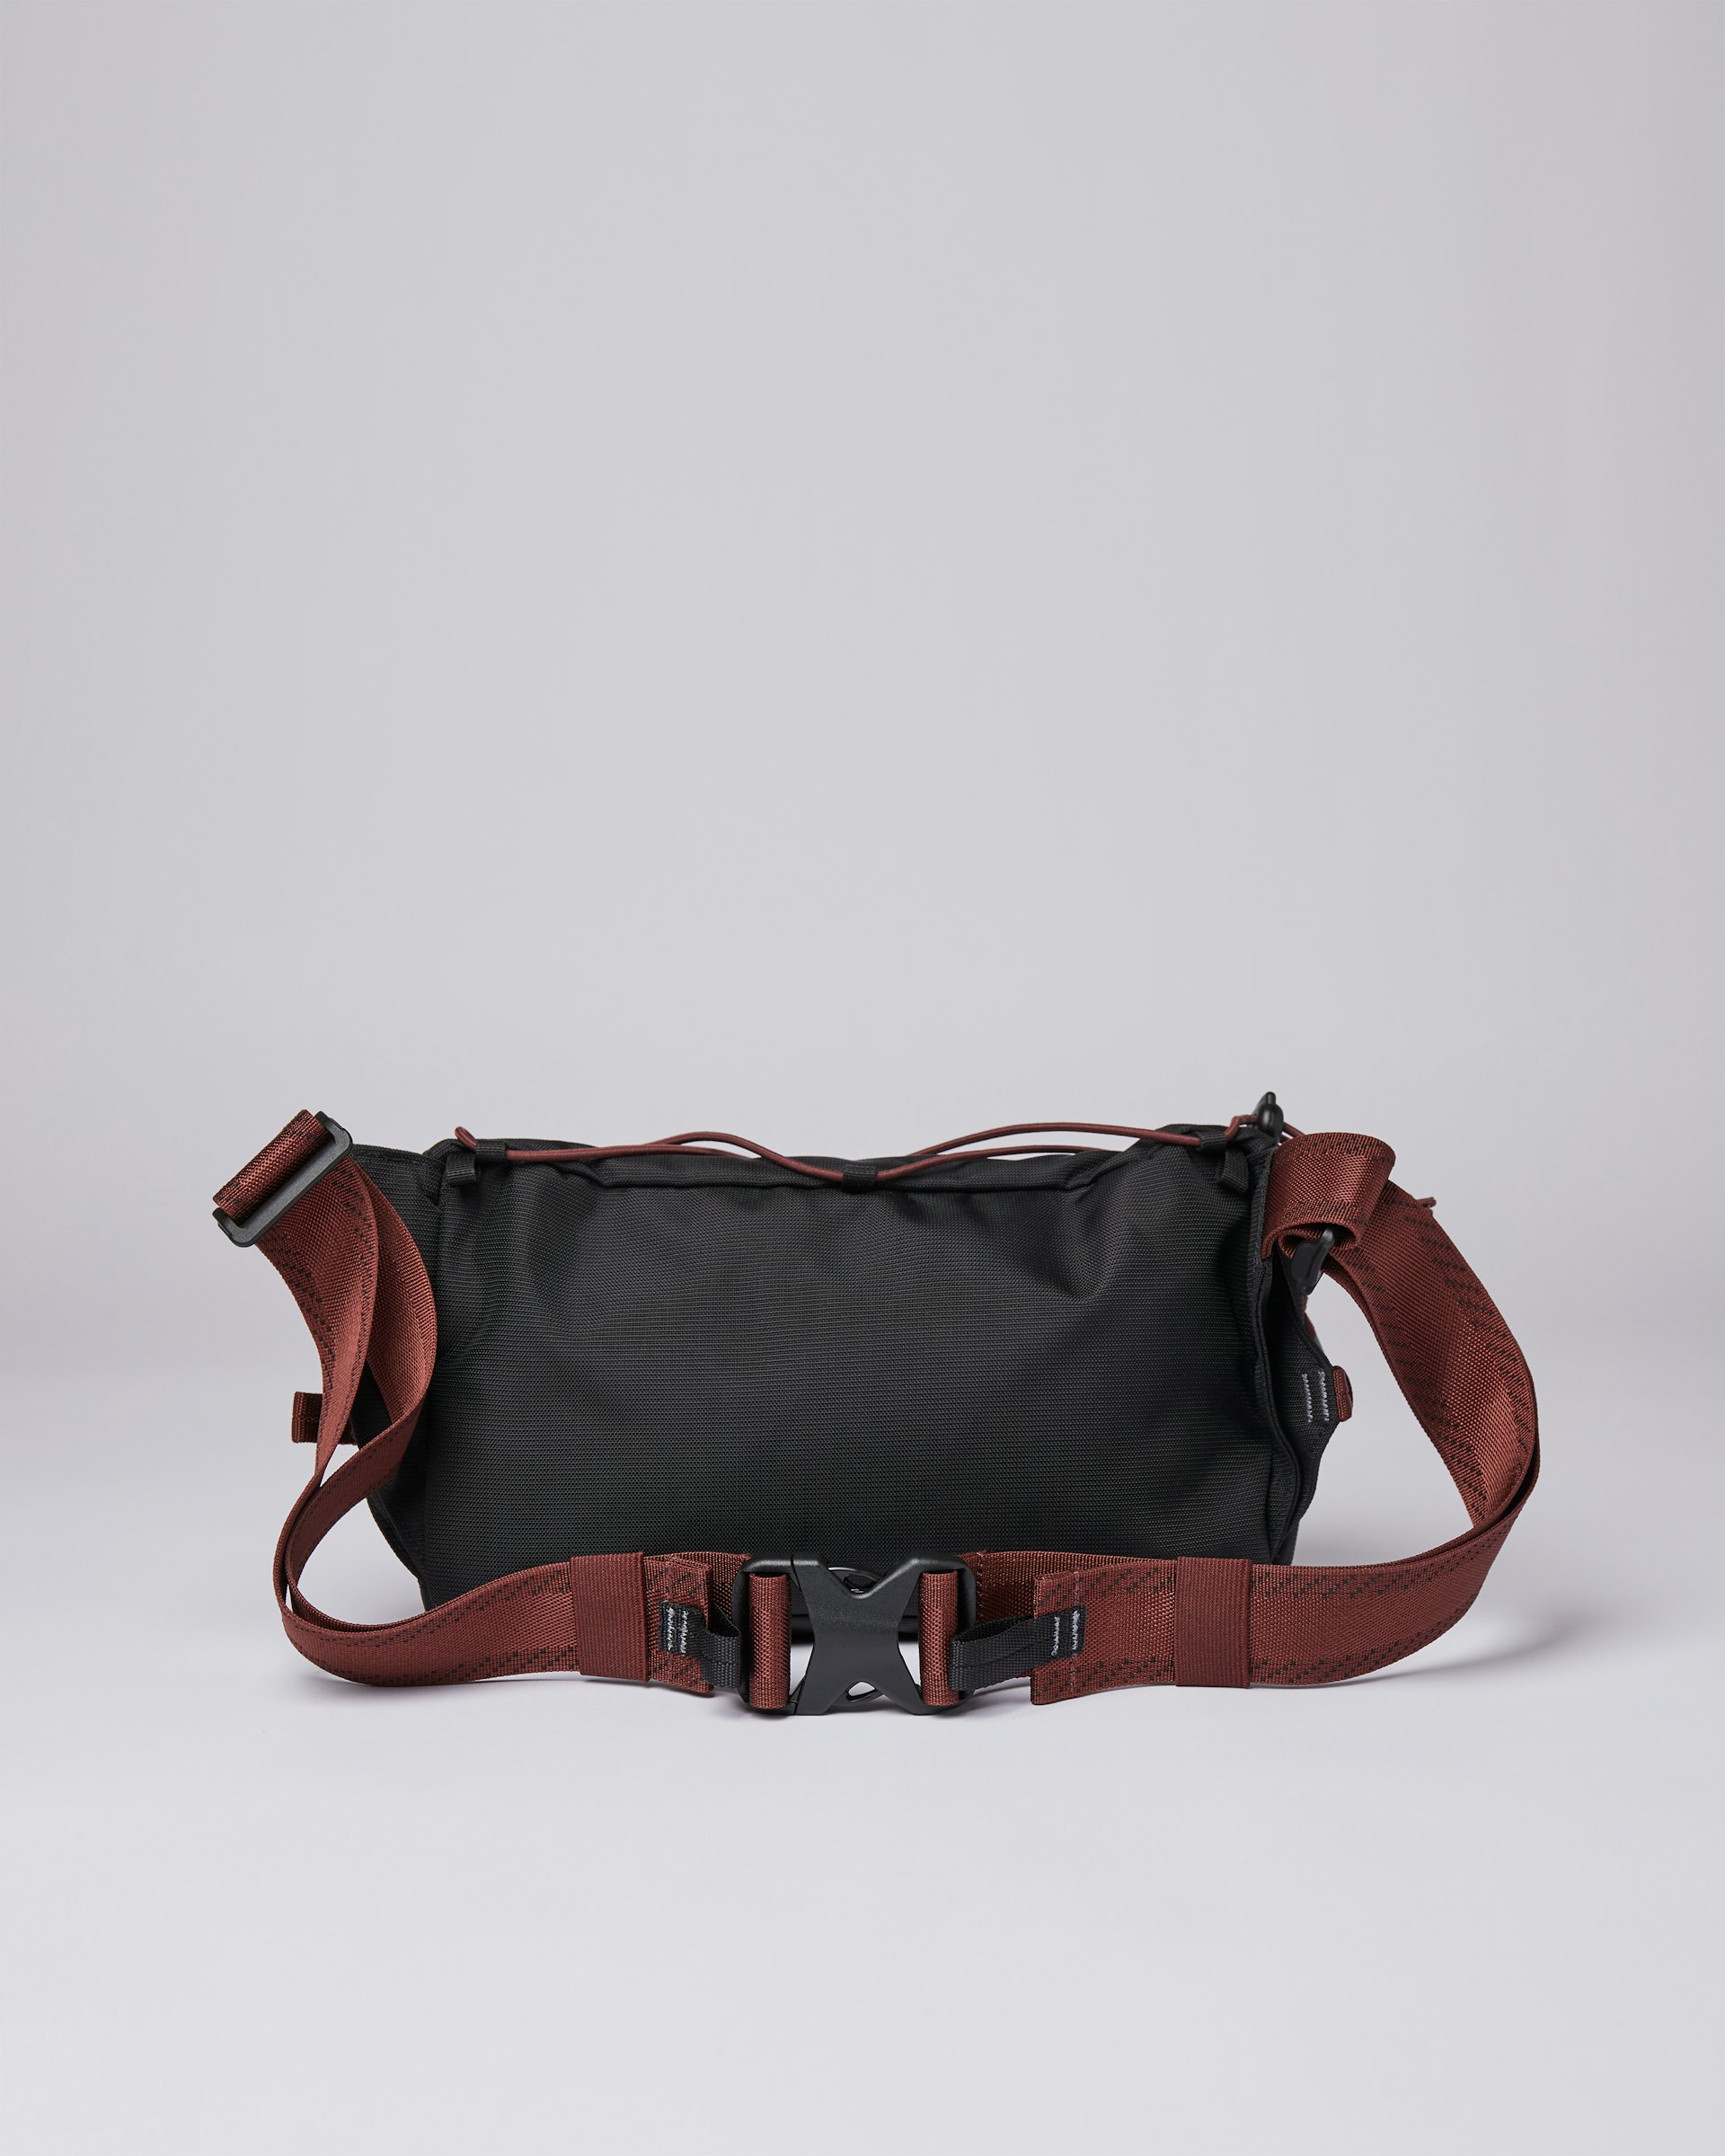 Allterrain Hike belongs to the category Bum bags and is in color black (3 of 7)